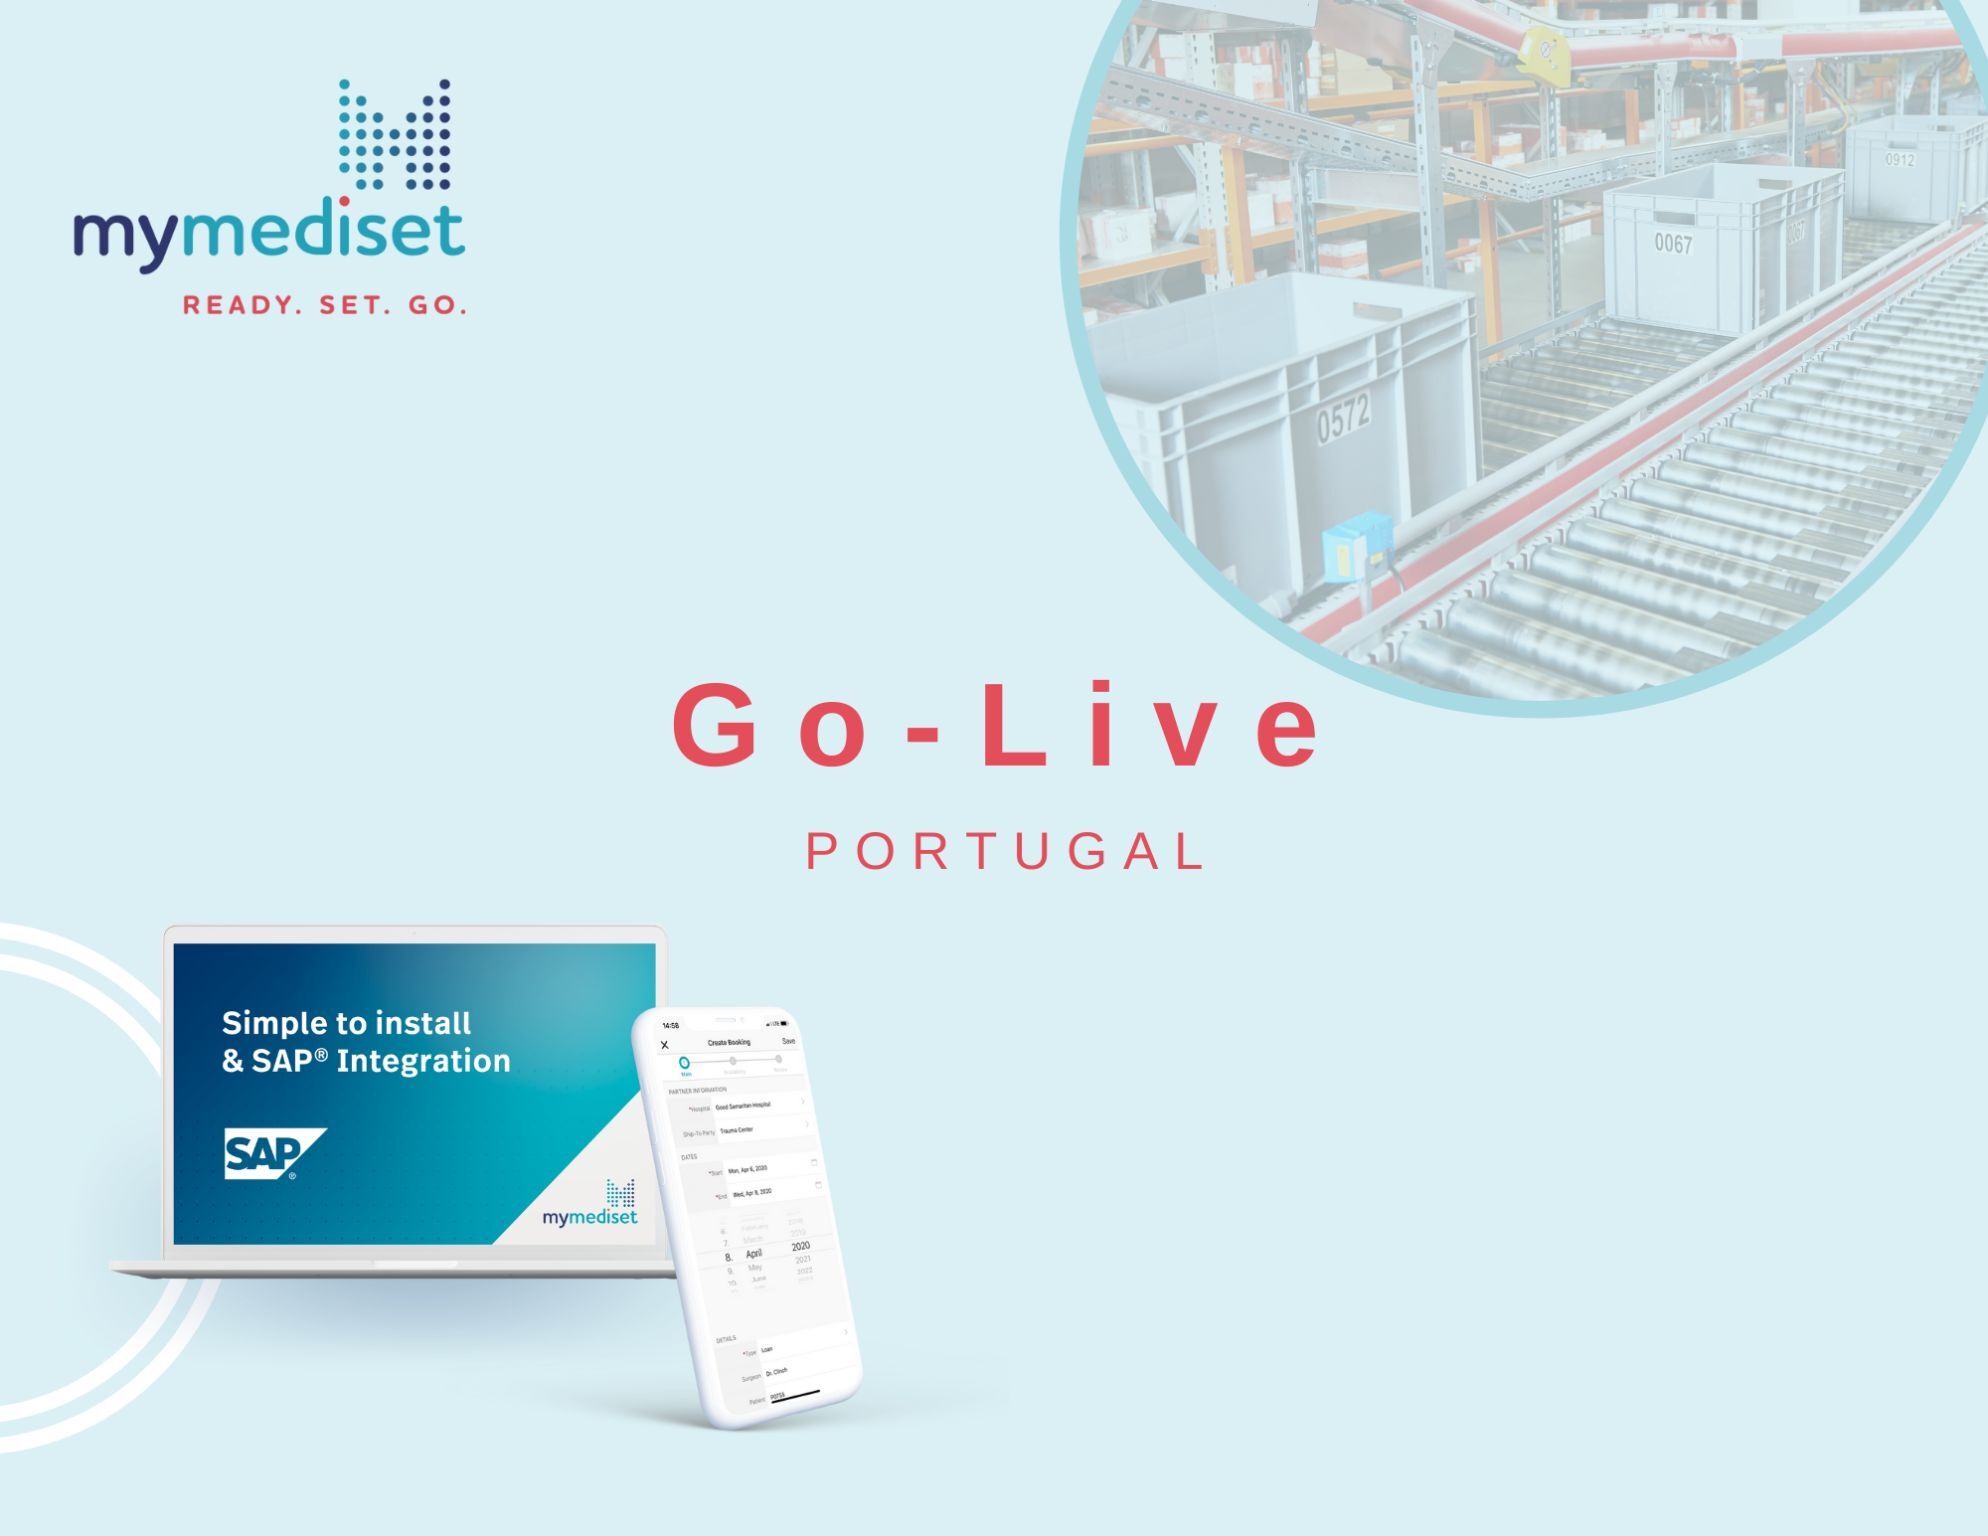 Go-Live at Zimmer Biomet in Portugal